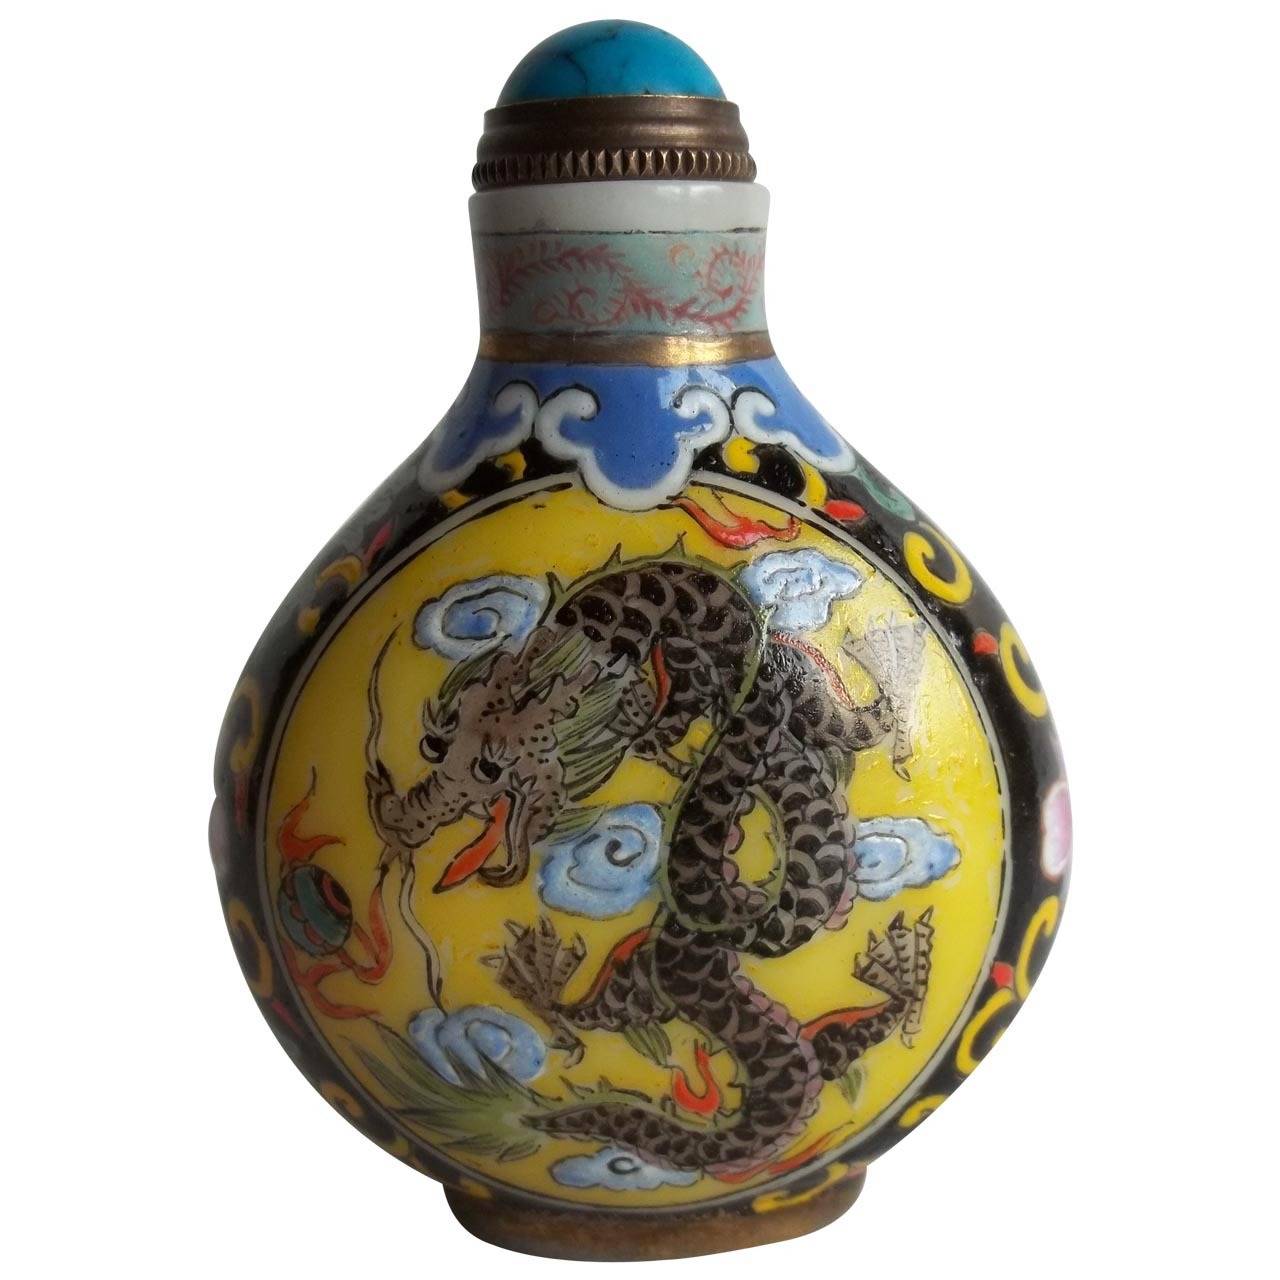 Details about   Chinese Old Marked Enamel Colored Toad Gilt Porcelain Snuff Bottle 